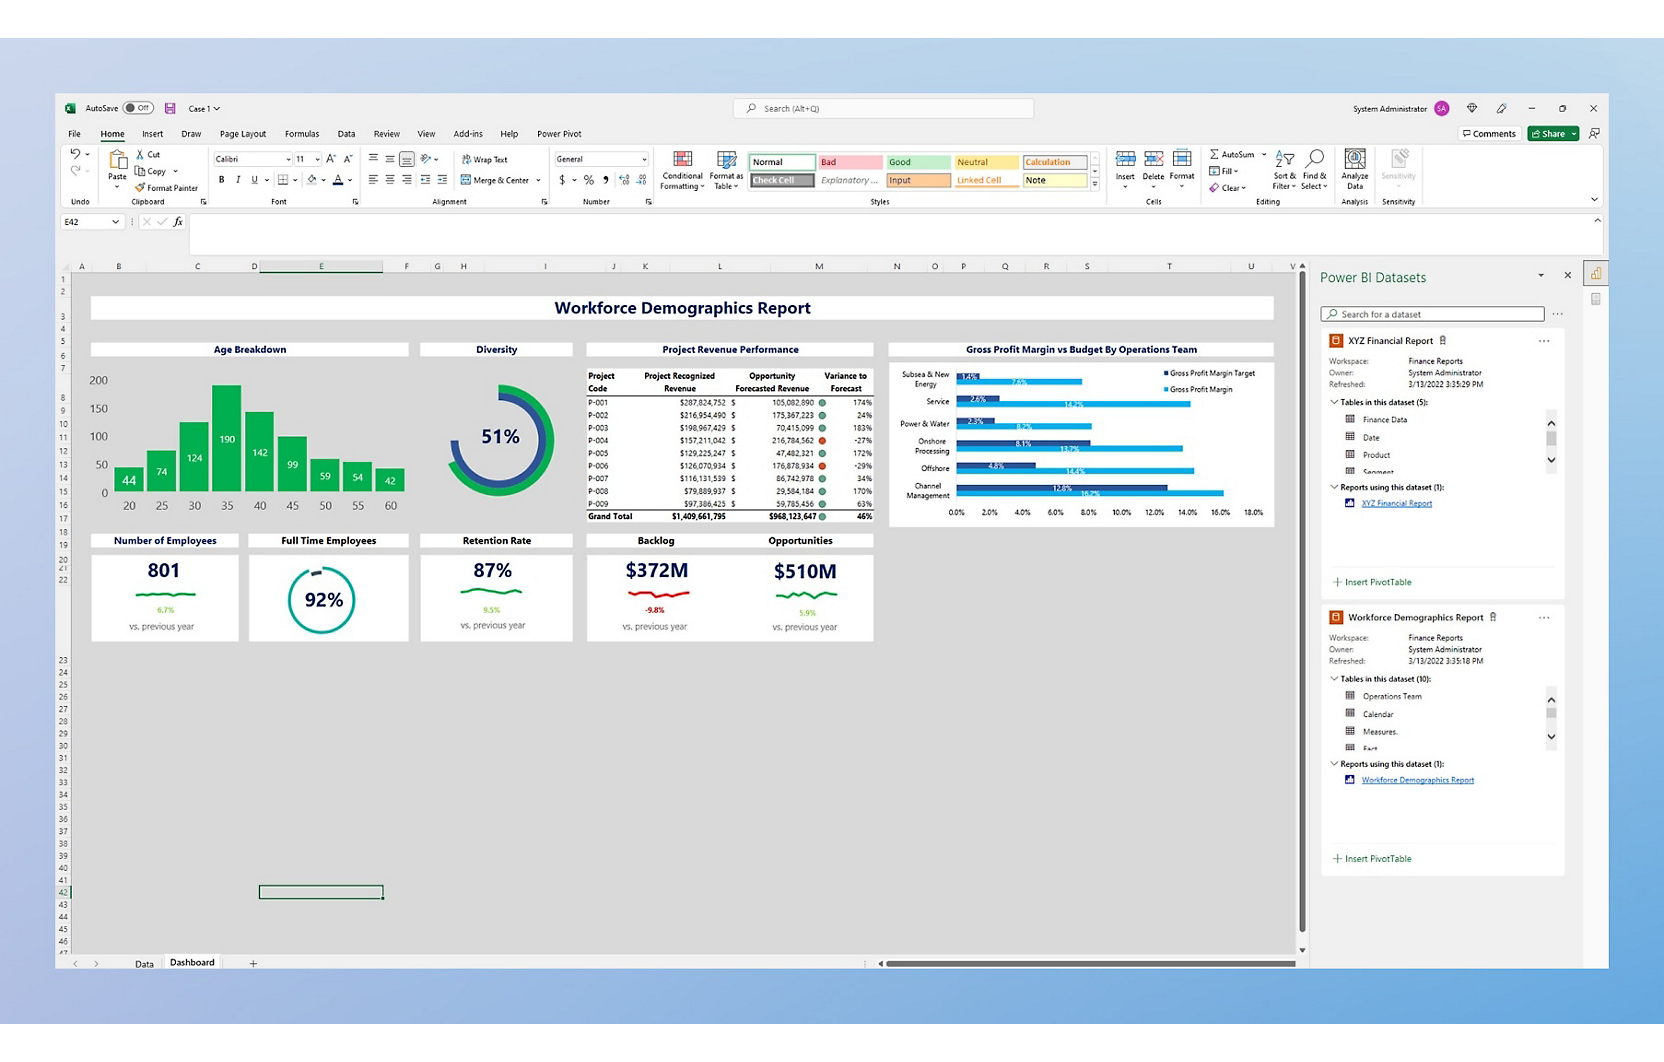 A screen shot of Excel with Power BI data